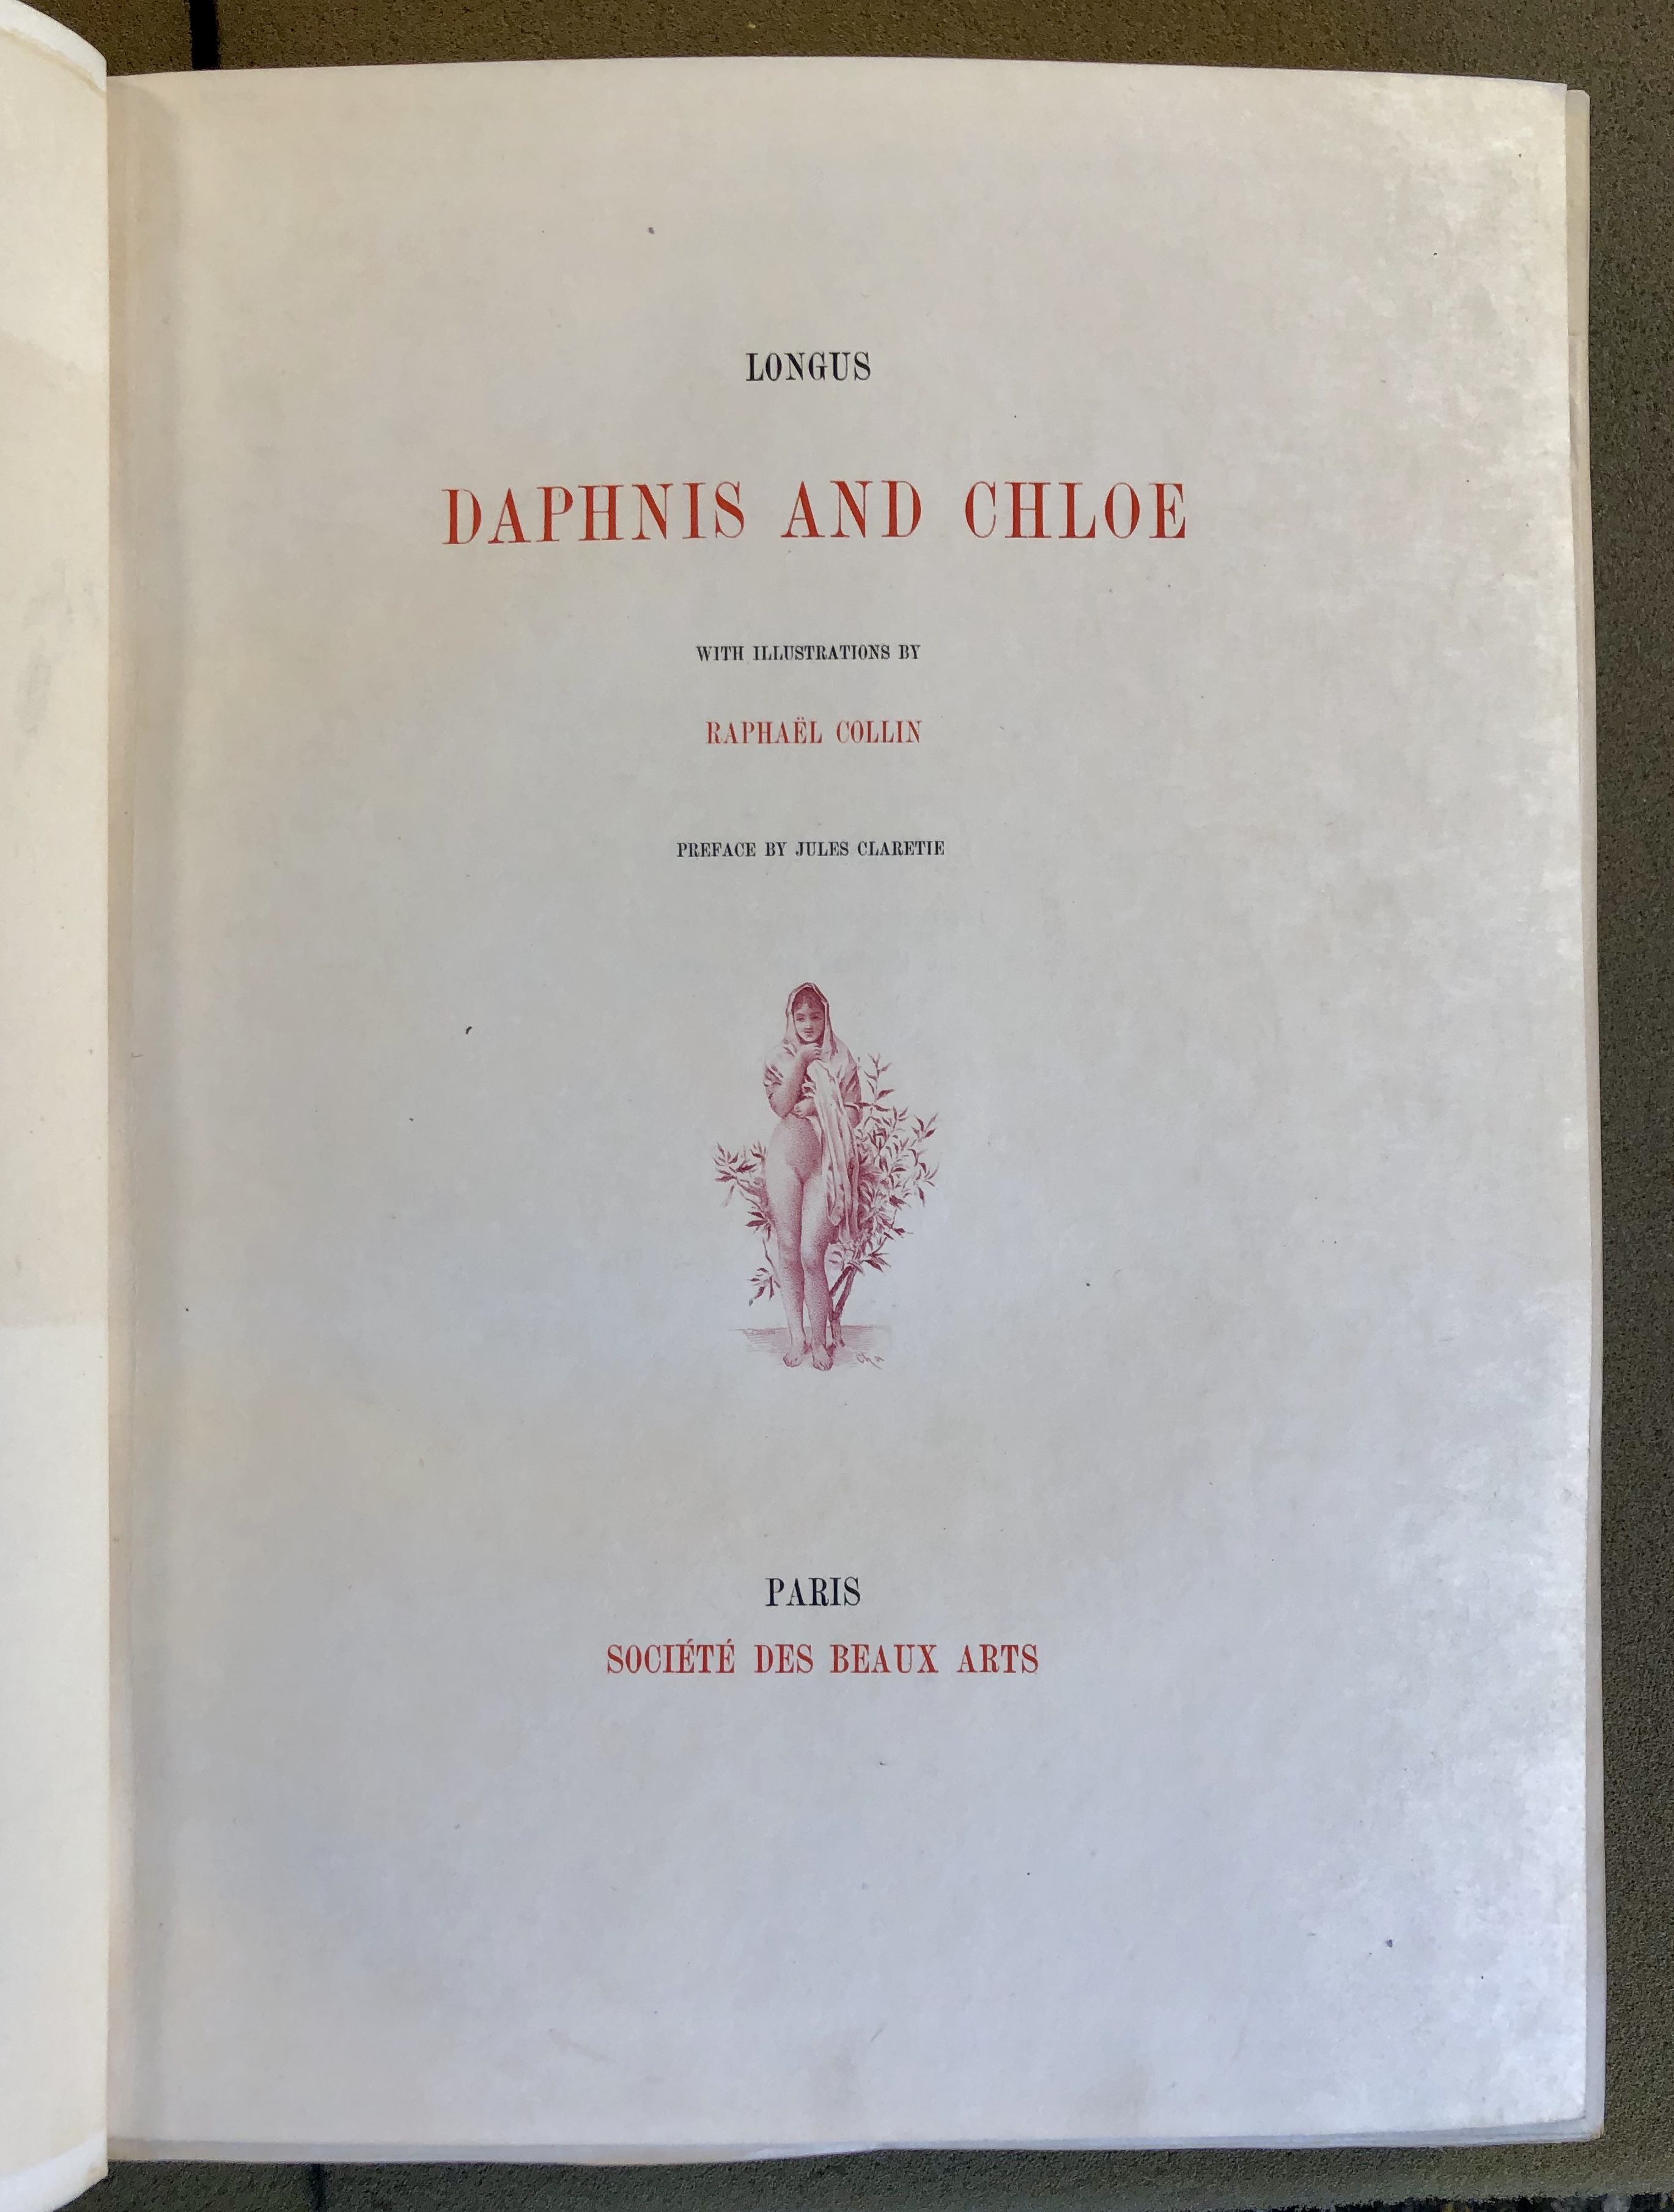 Daphnis and Chloe - title page